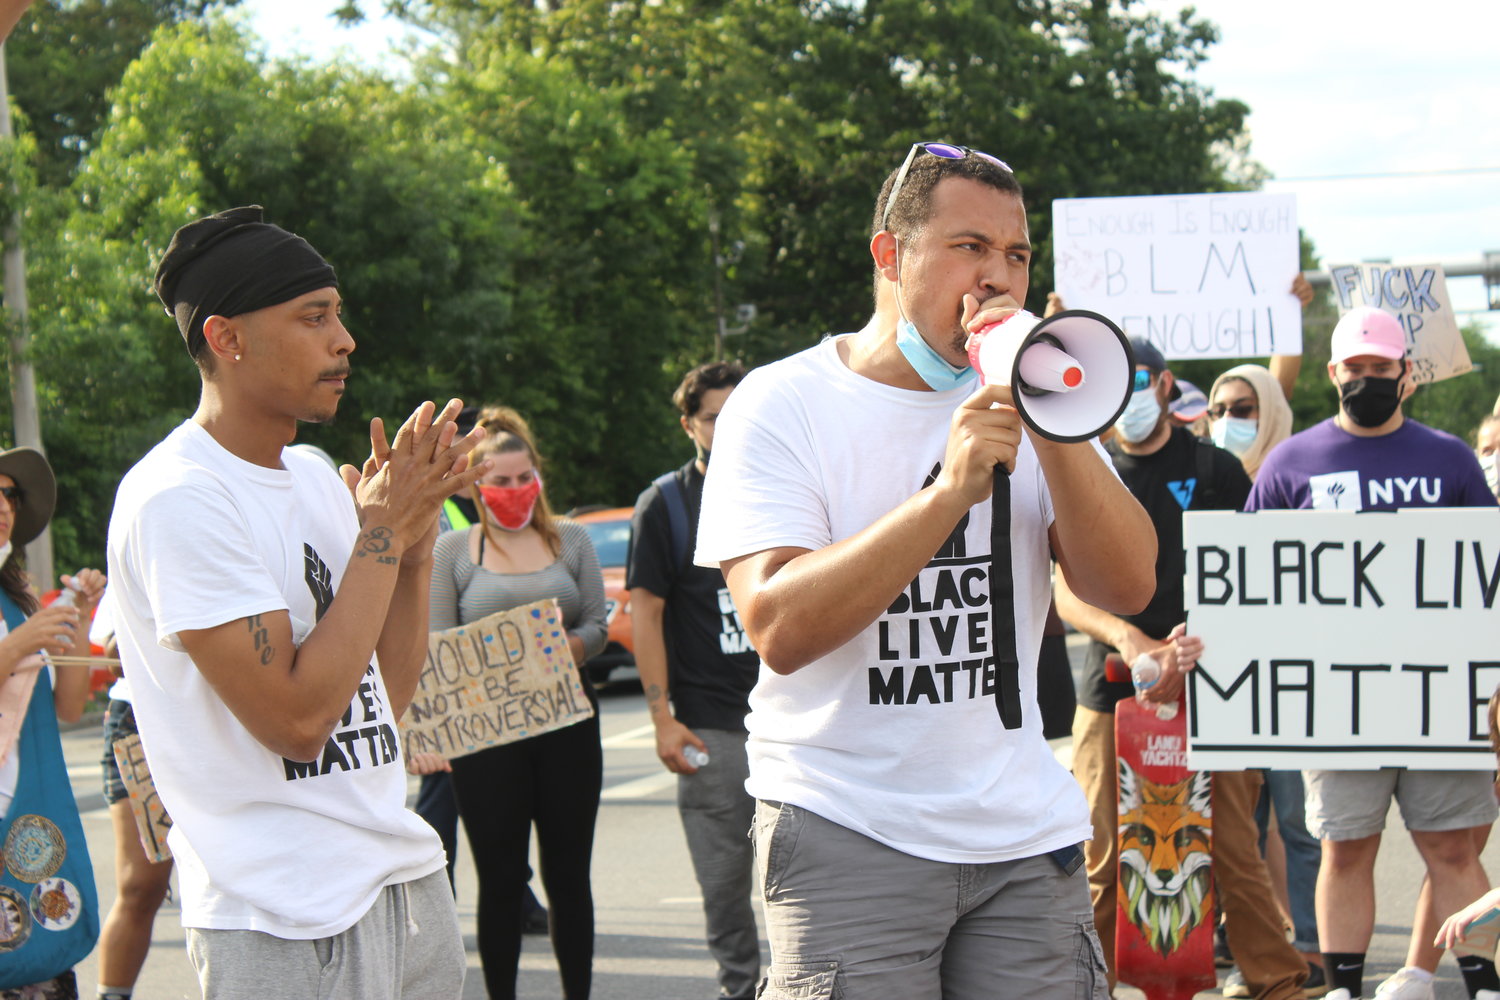 Terrel Tuosto, right, shared with the crowd his experiences with racial profiling and racism from law enforcement. He was with his brother Tiandre.